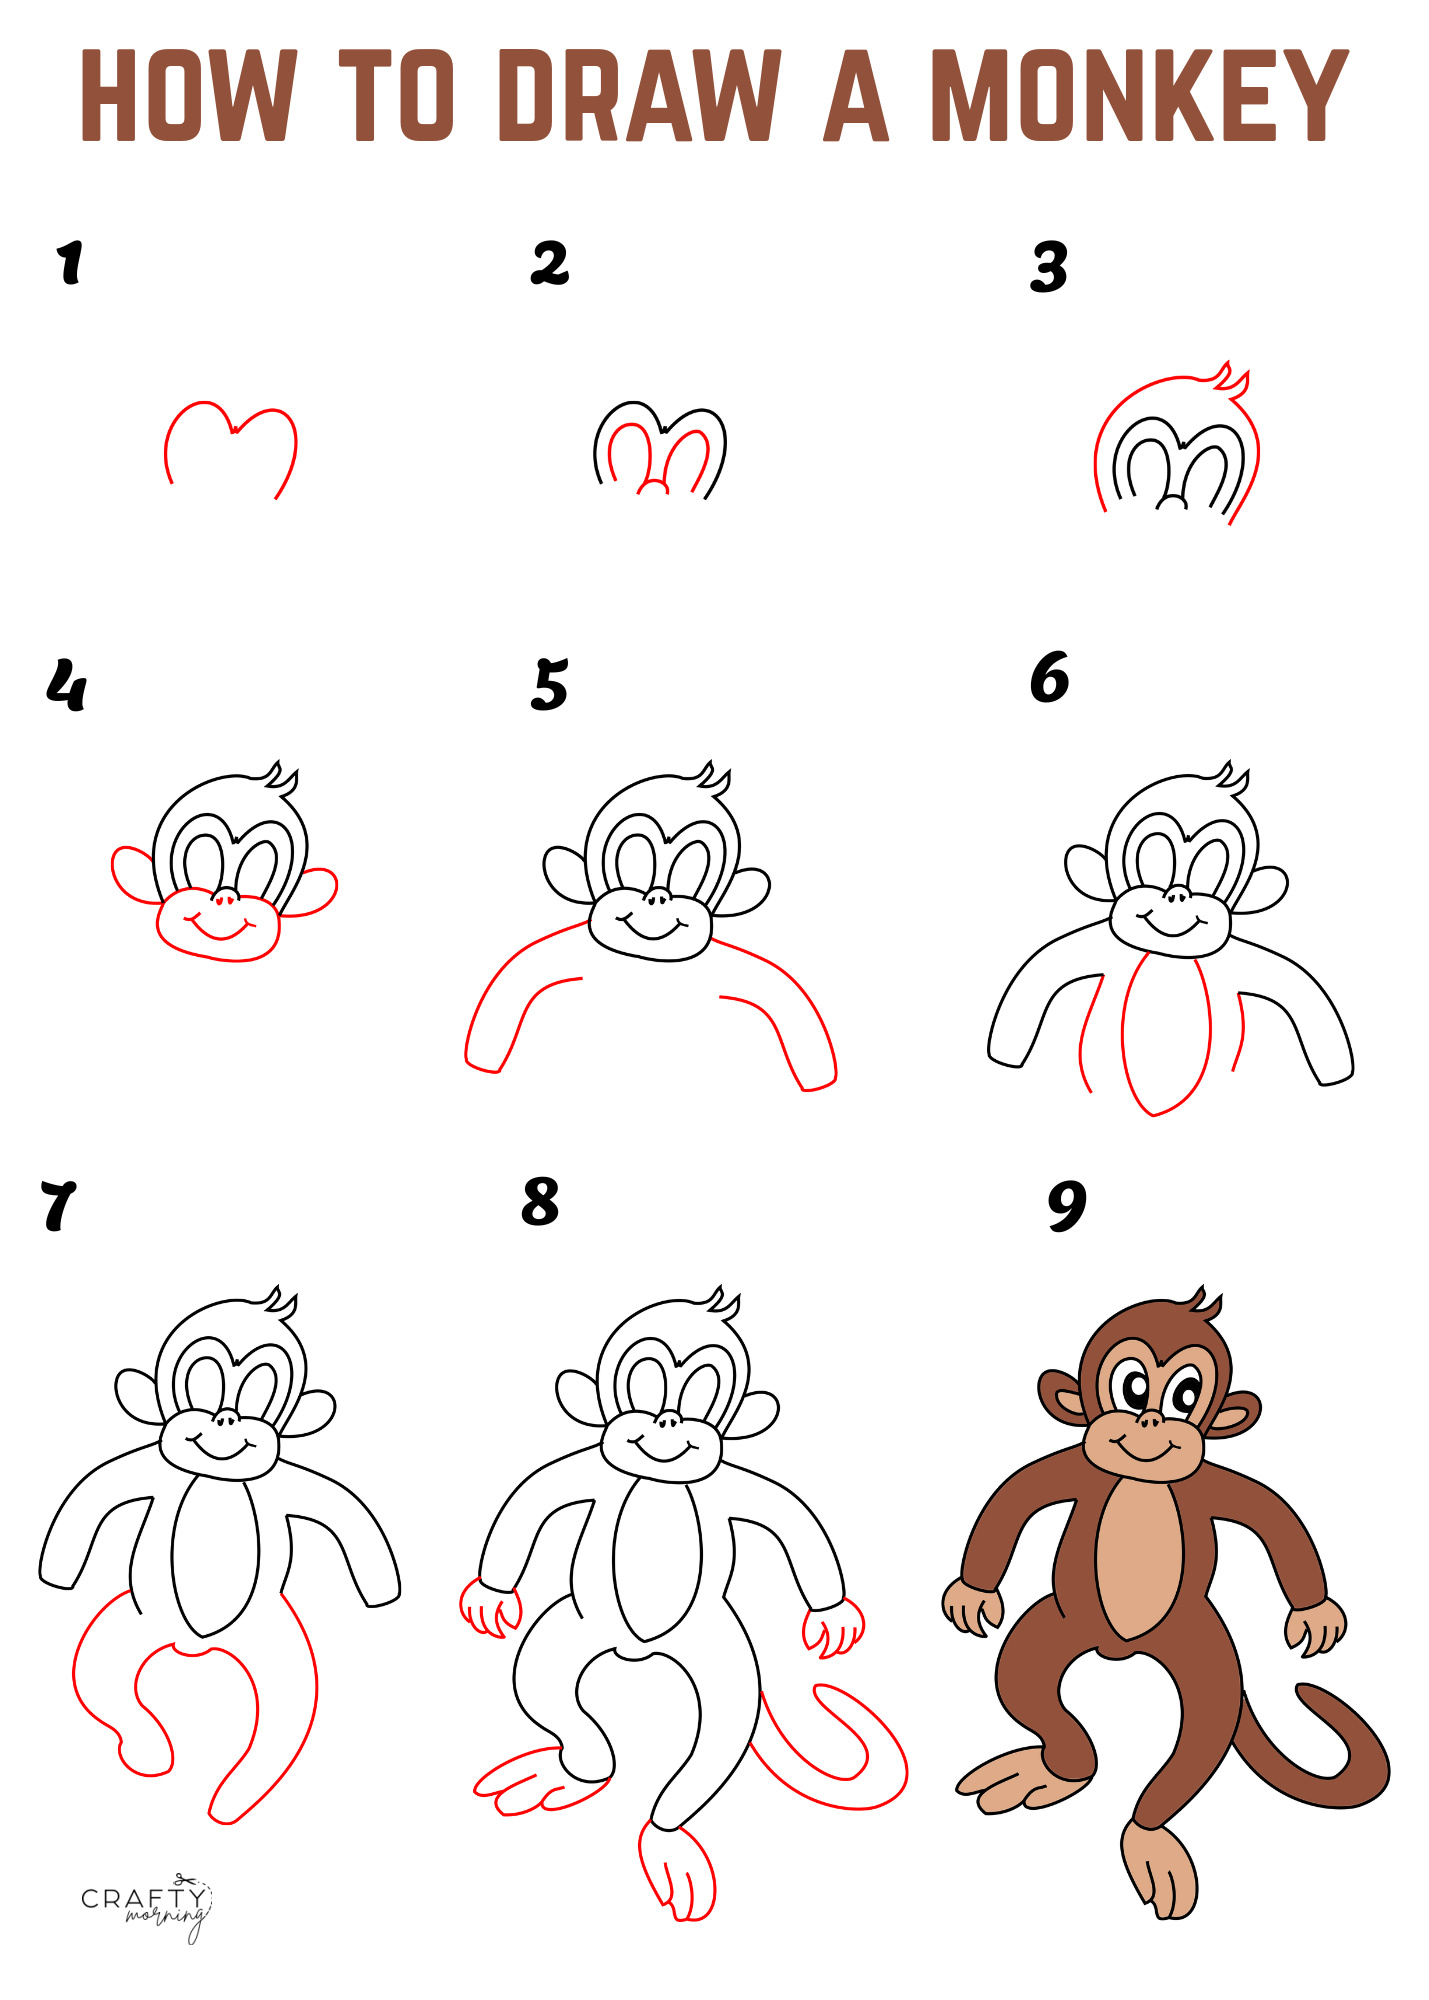 How to draw a monkey easy | Monkey face drawing - YouTube